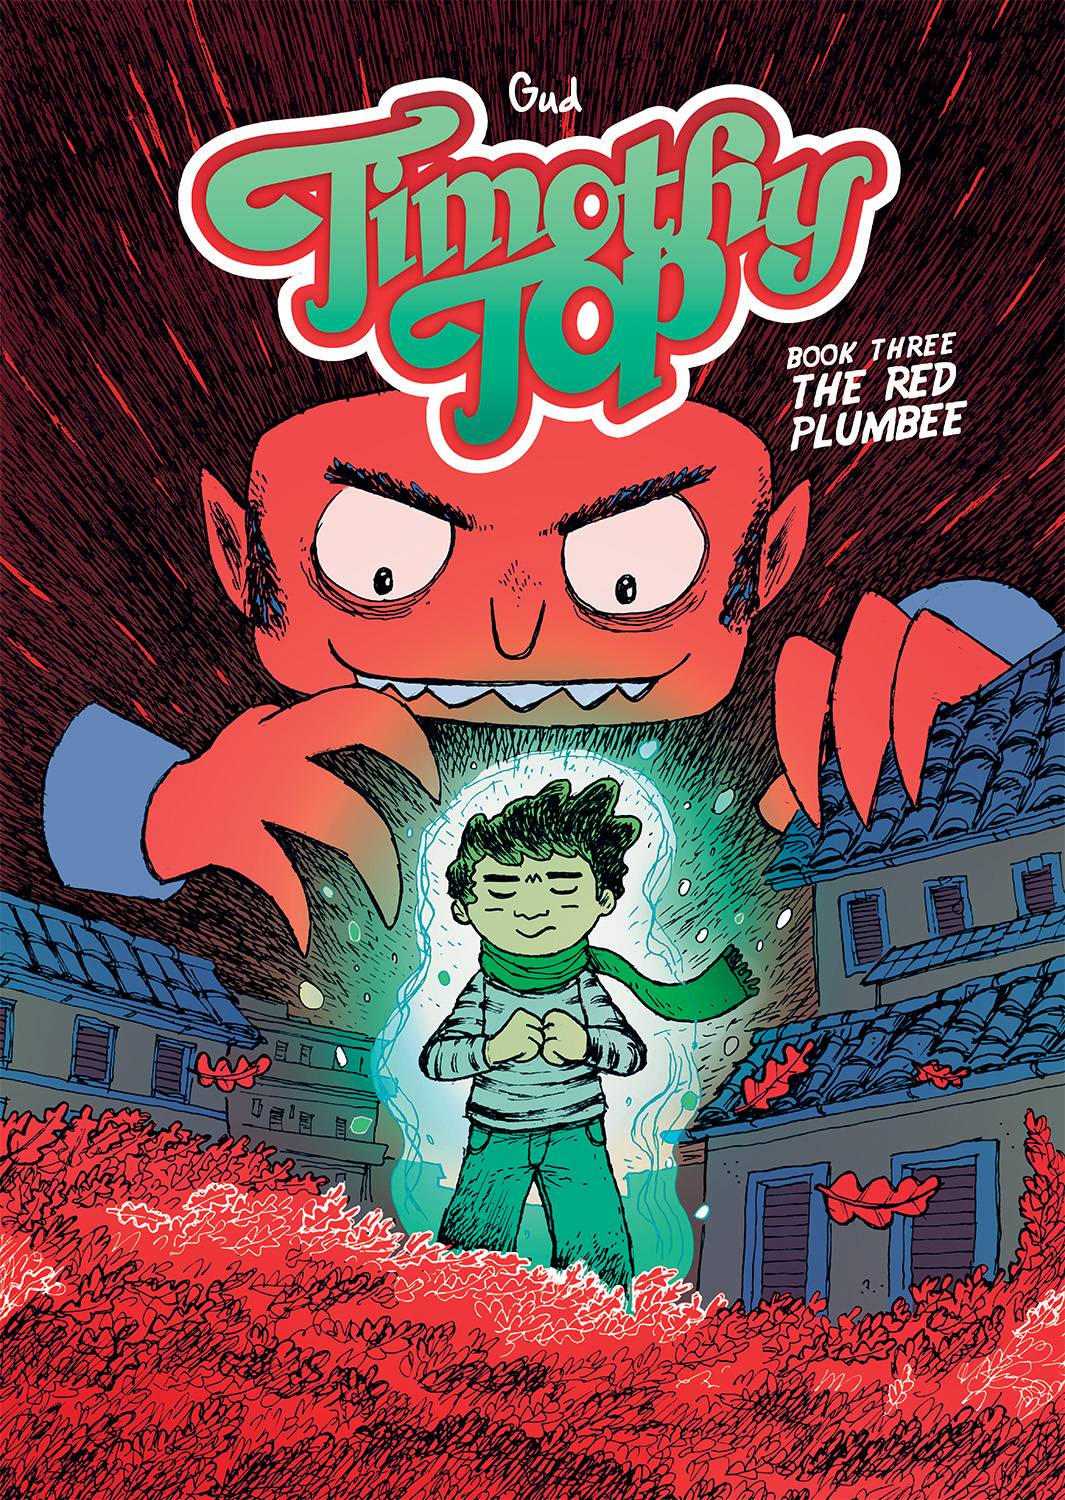 Timothy Top Graphic Novel Book 3 Red Plumbee